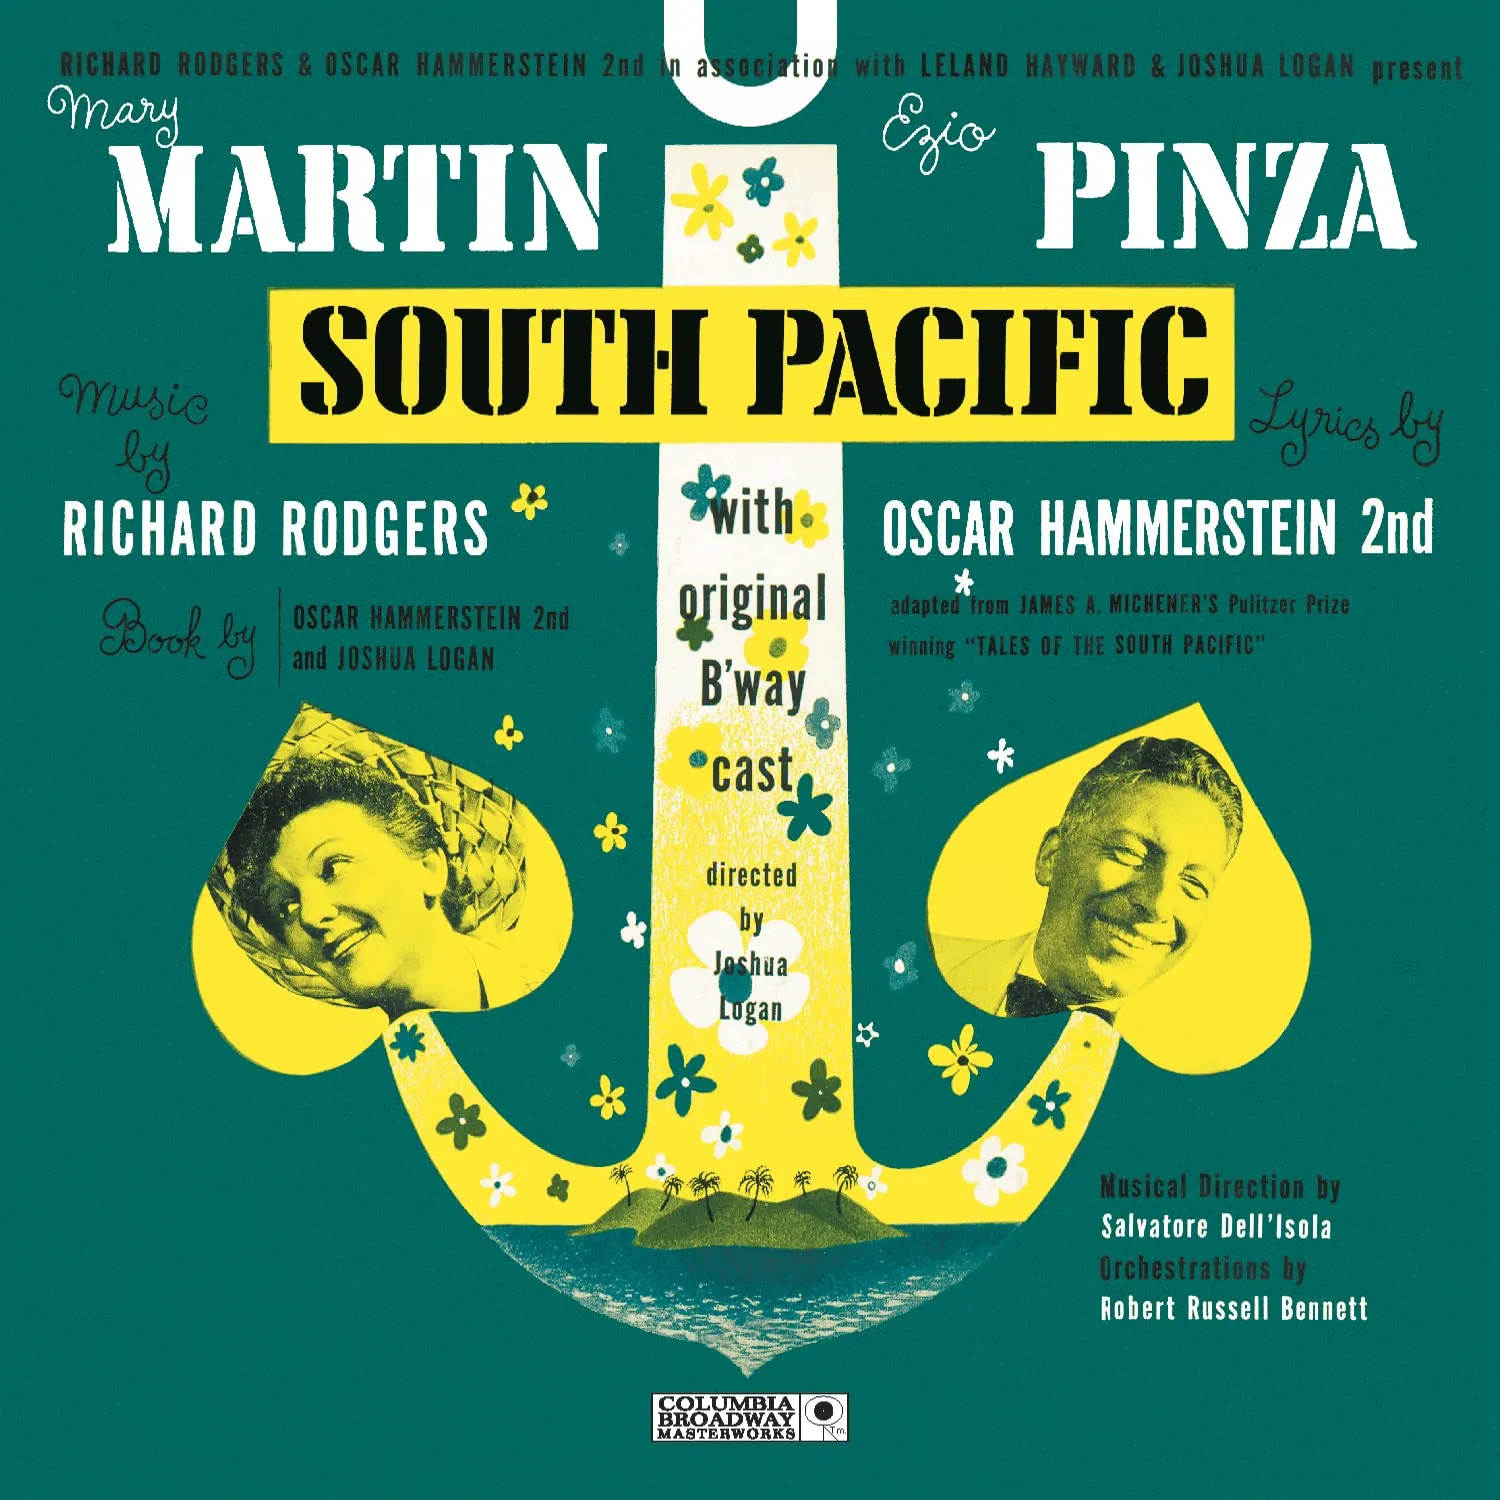 South Pacific broadway cover.